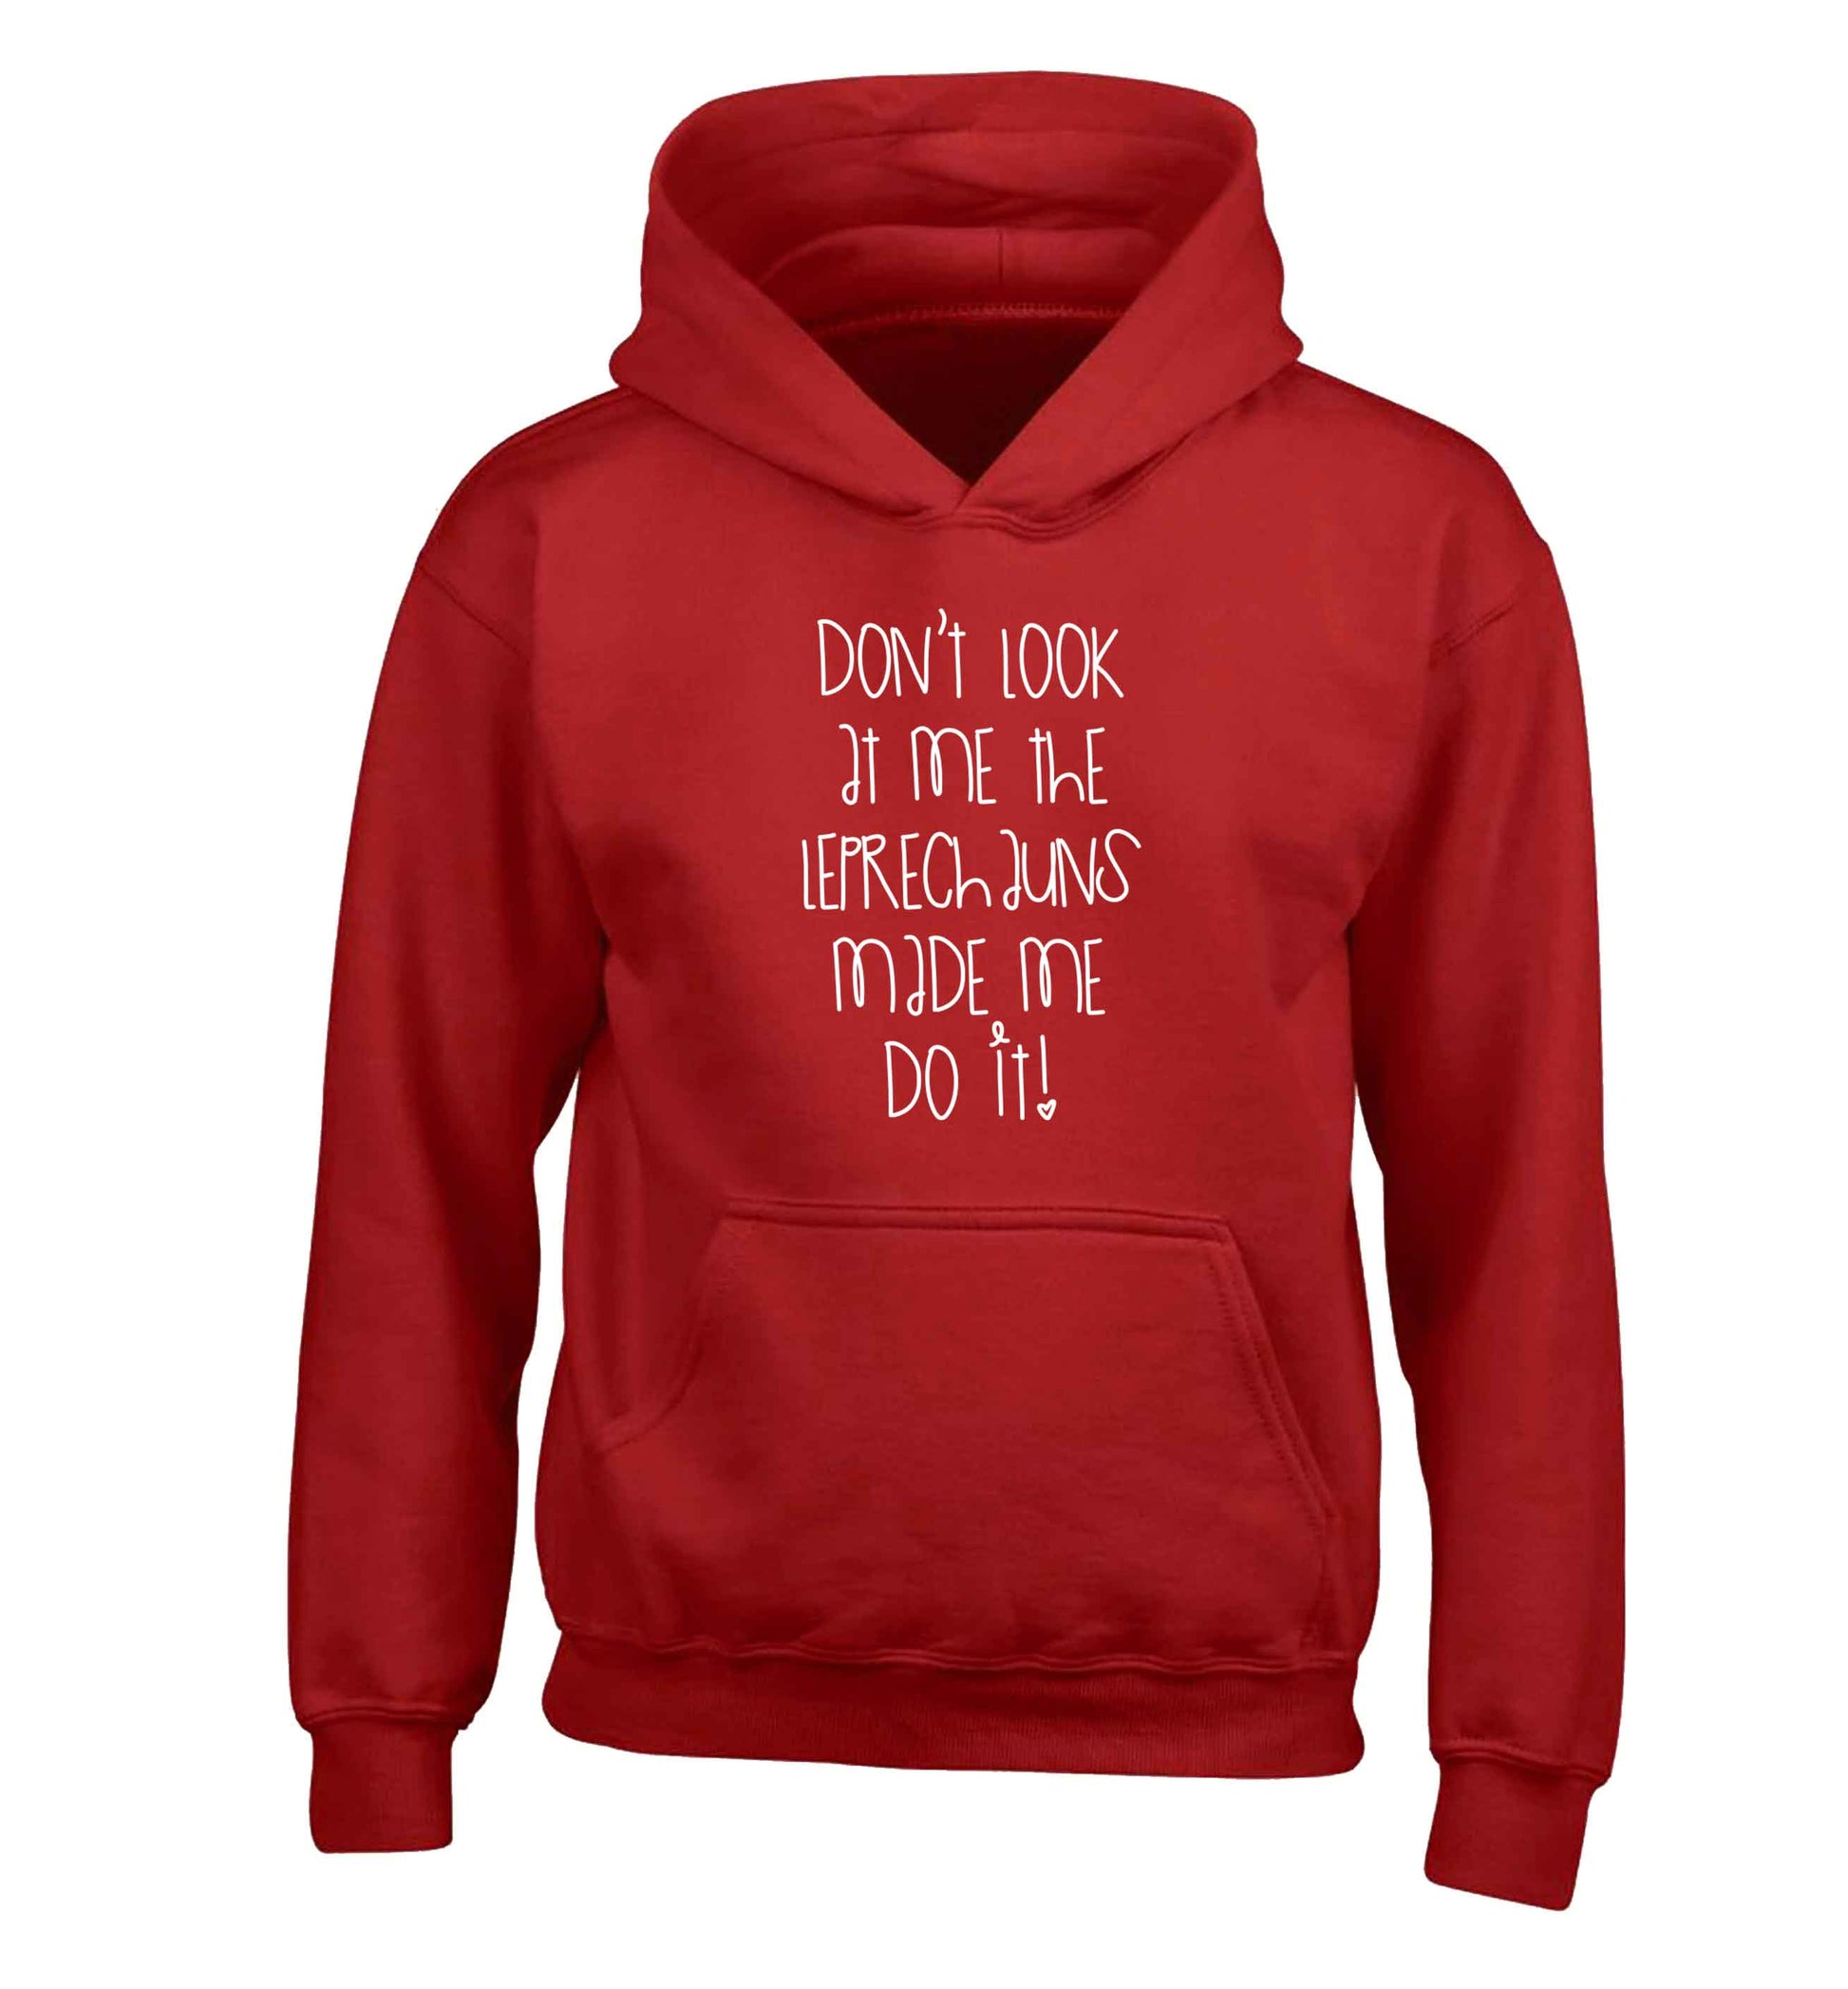 Don't look at me the leprechauns made me do it children's red hoodie 12-13 Years